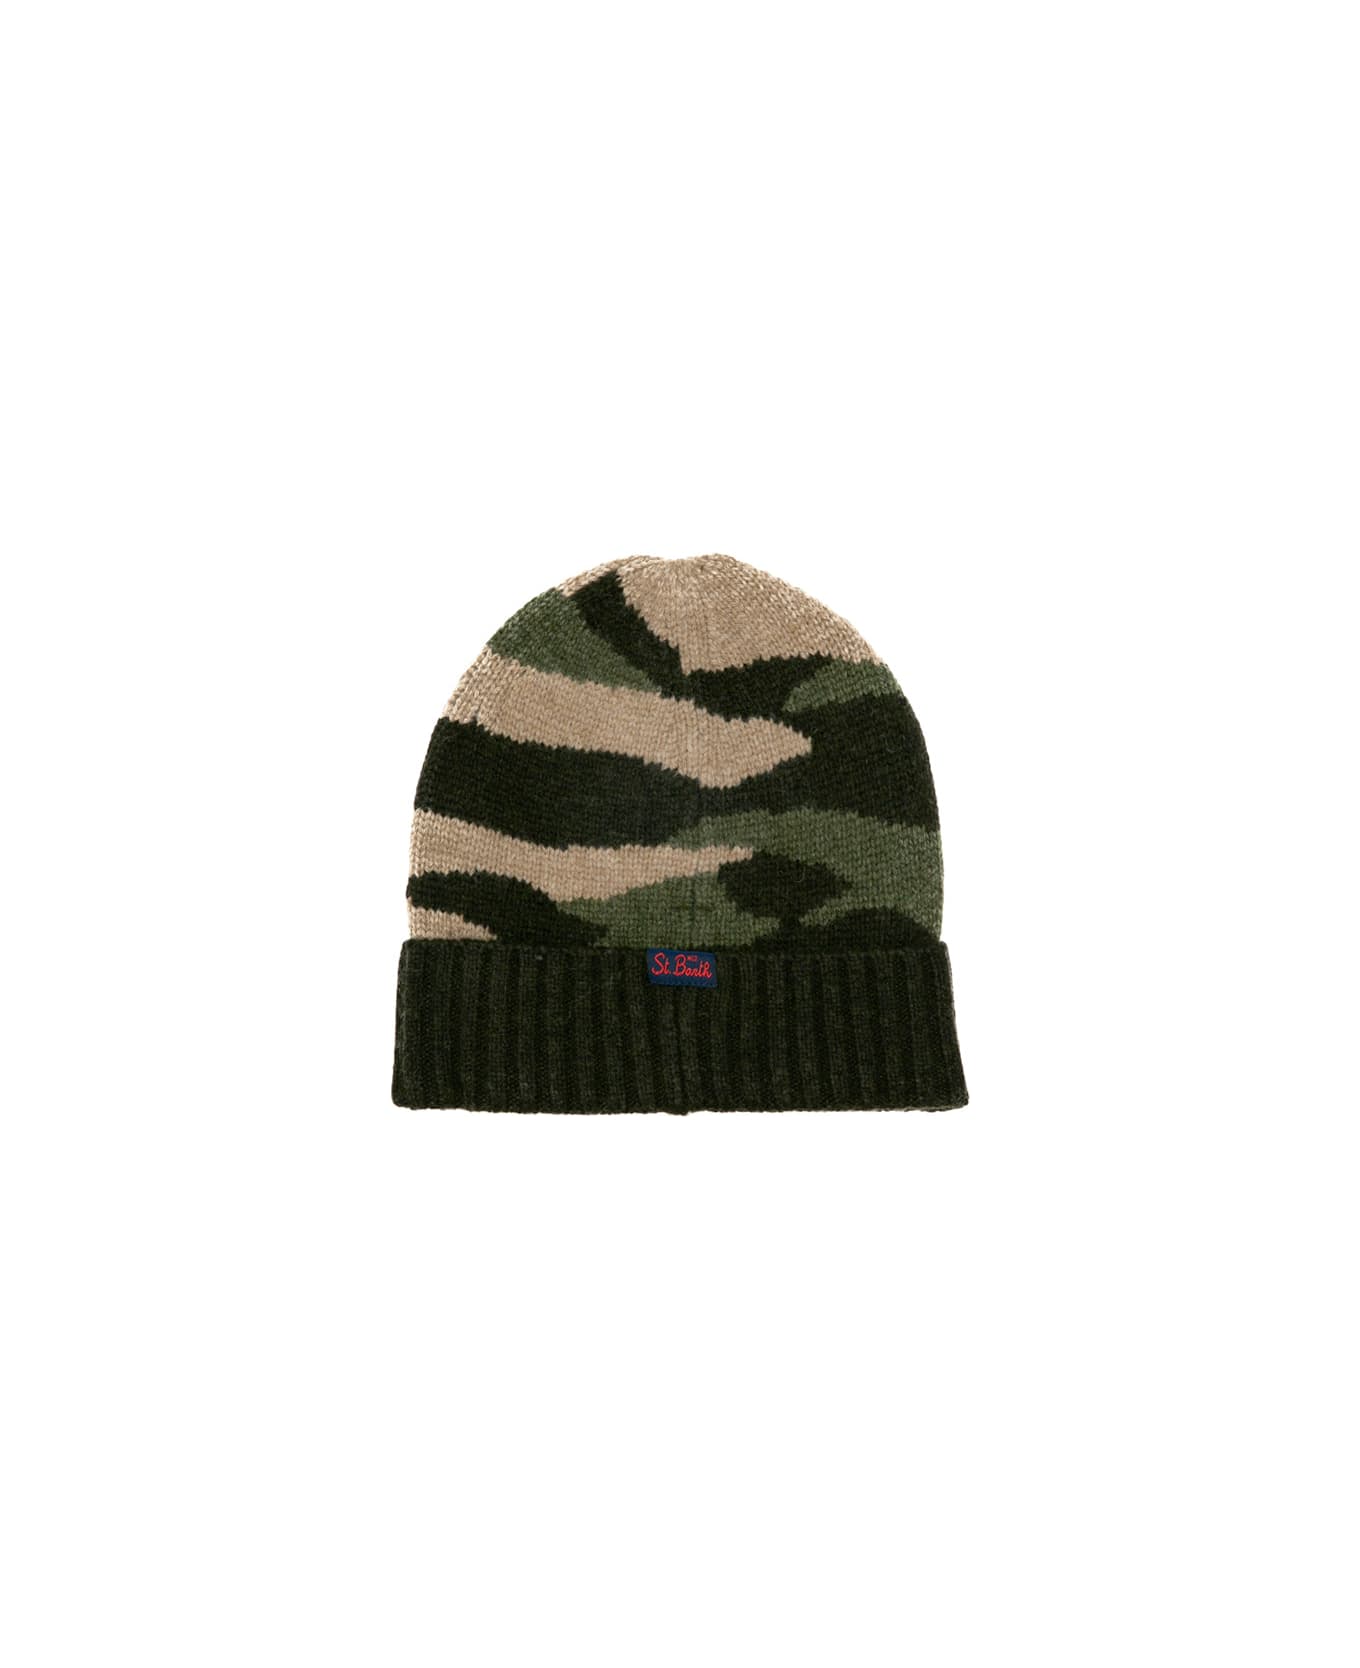 MC2 Saint Barth Blended Cashmere Hat With St. Barth Army Patch - GREEN